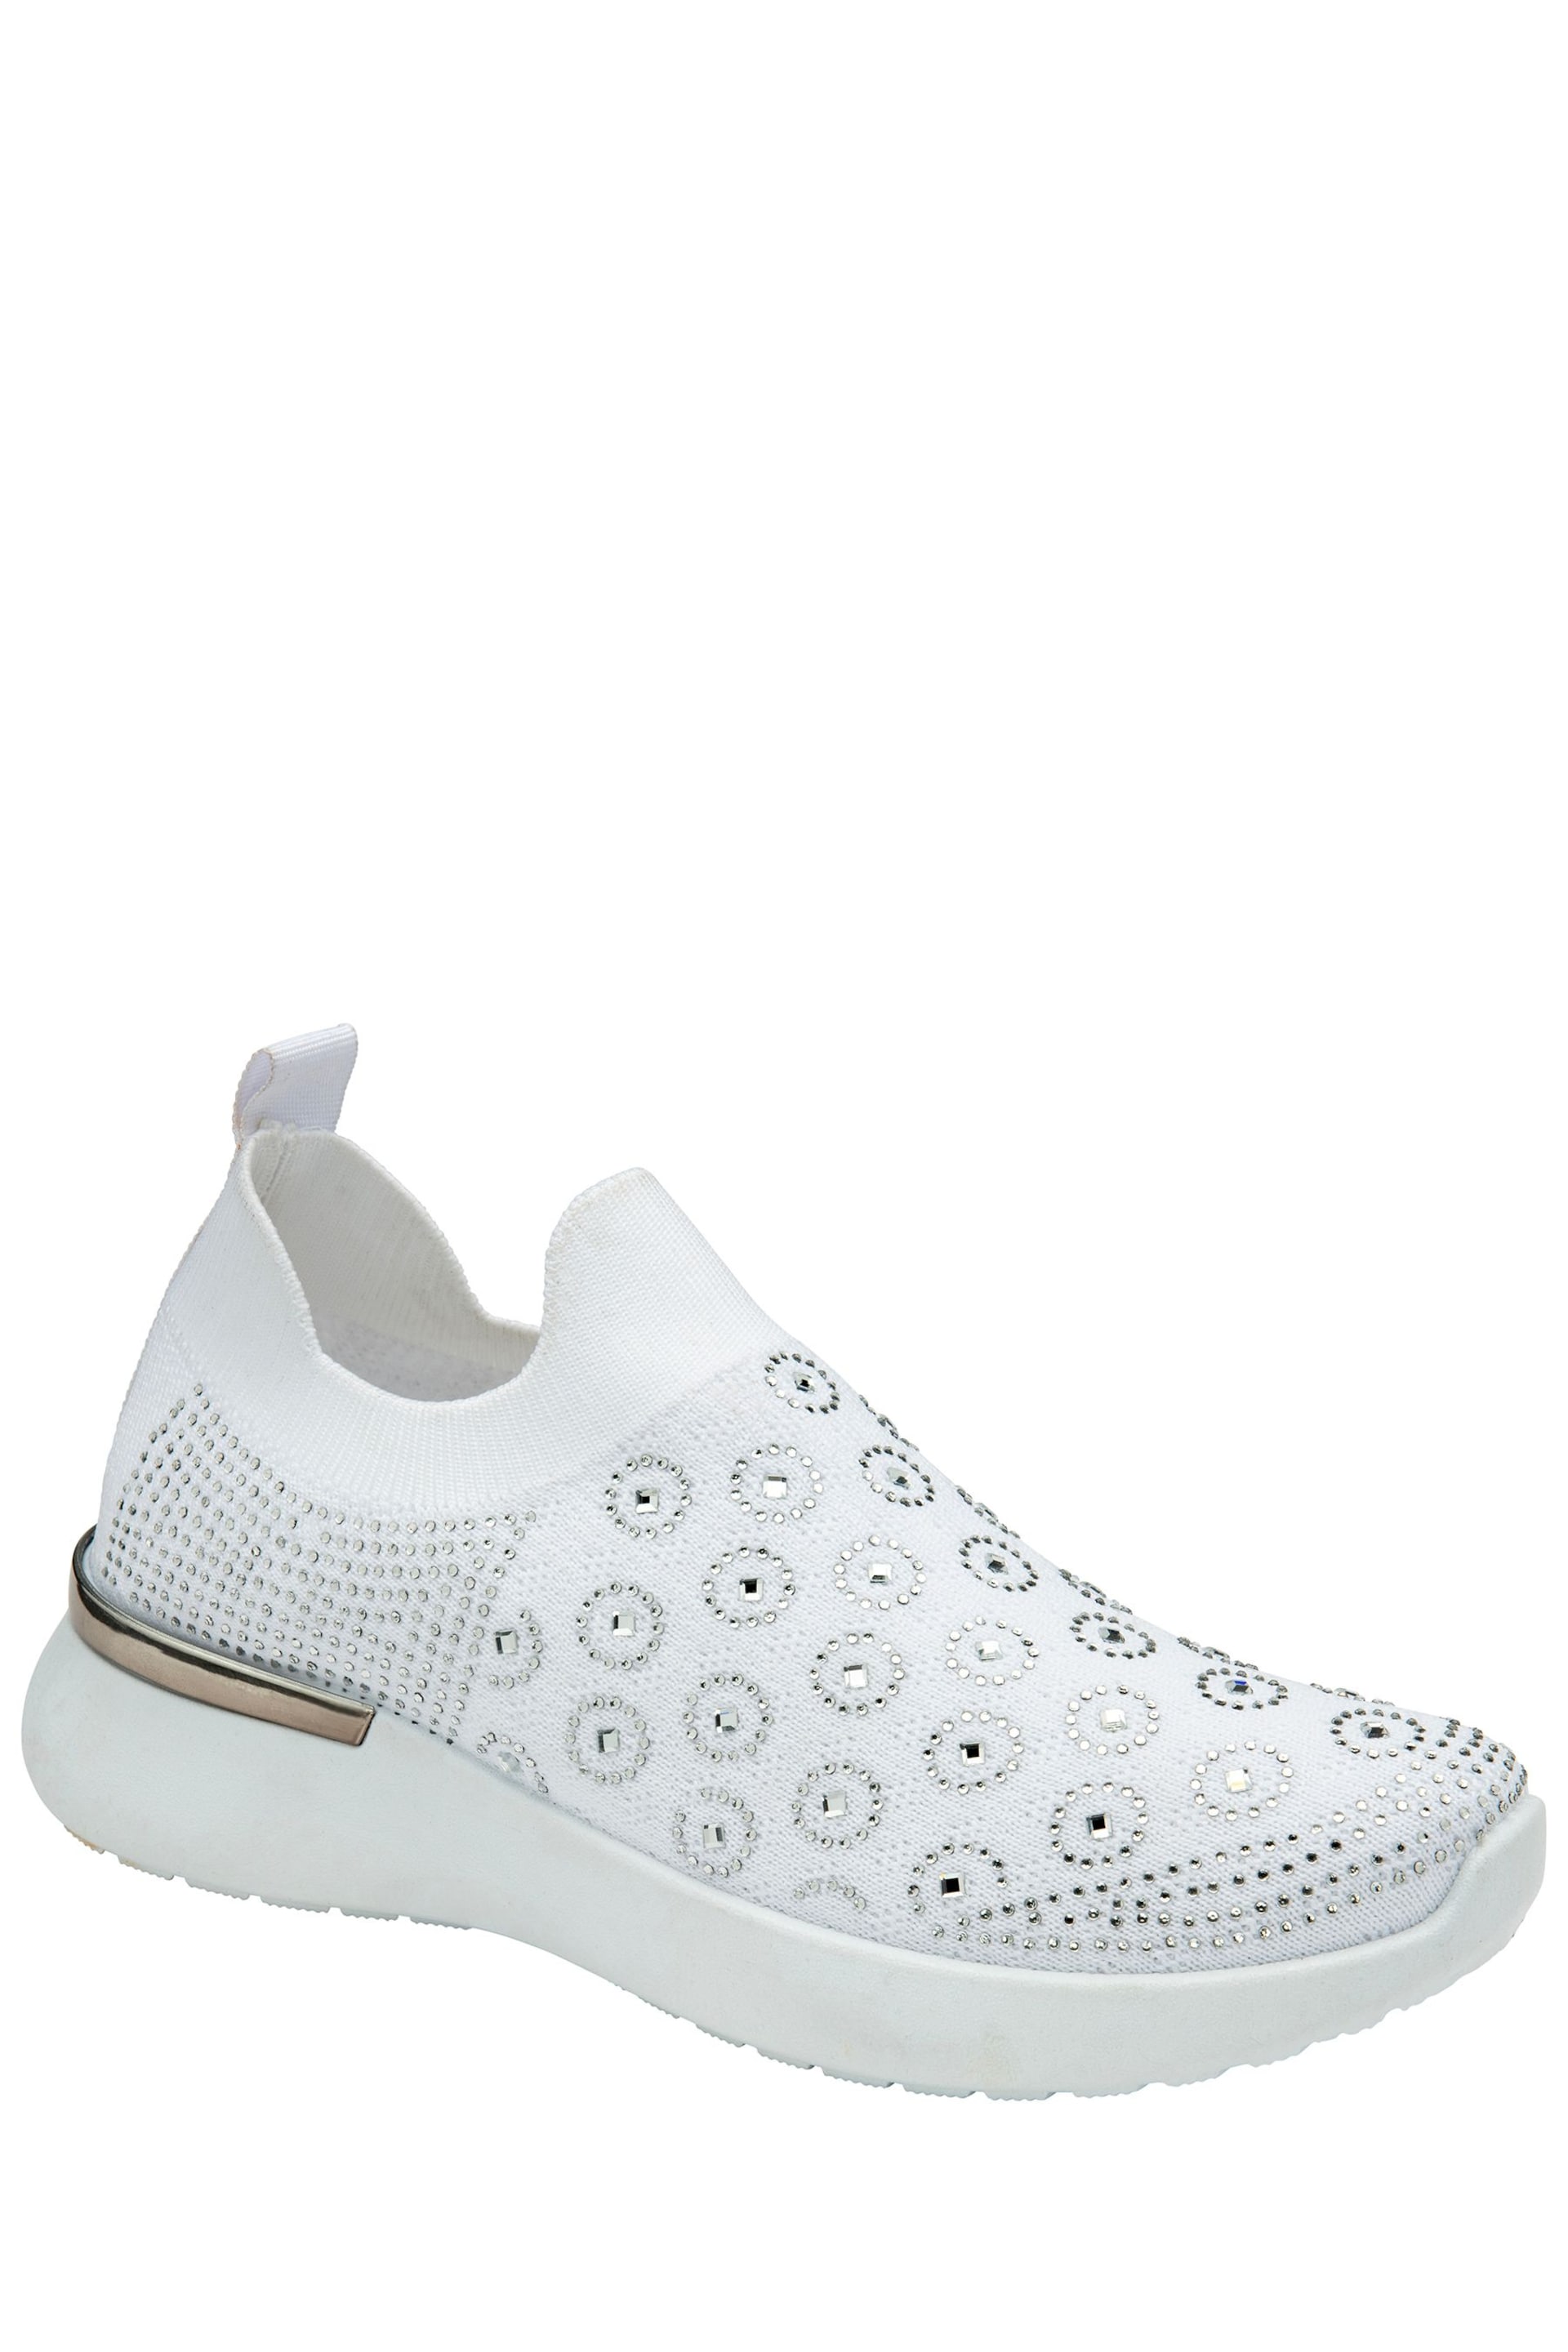 Lotus White Casual Knit Trainers - Image 1 of 4